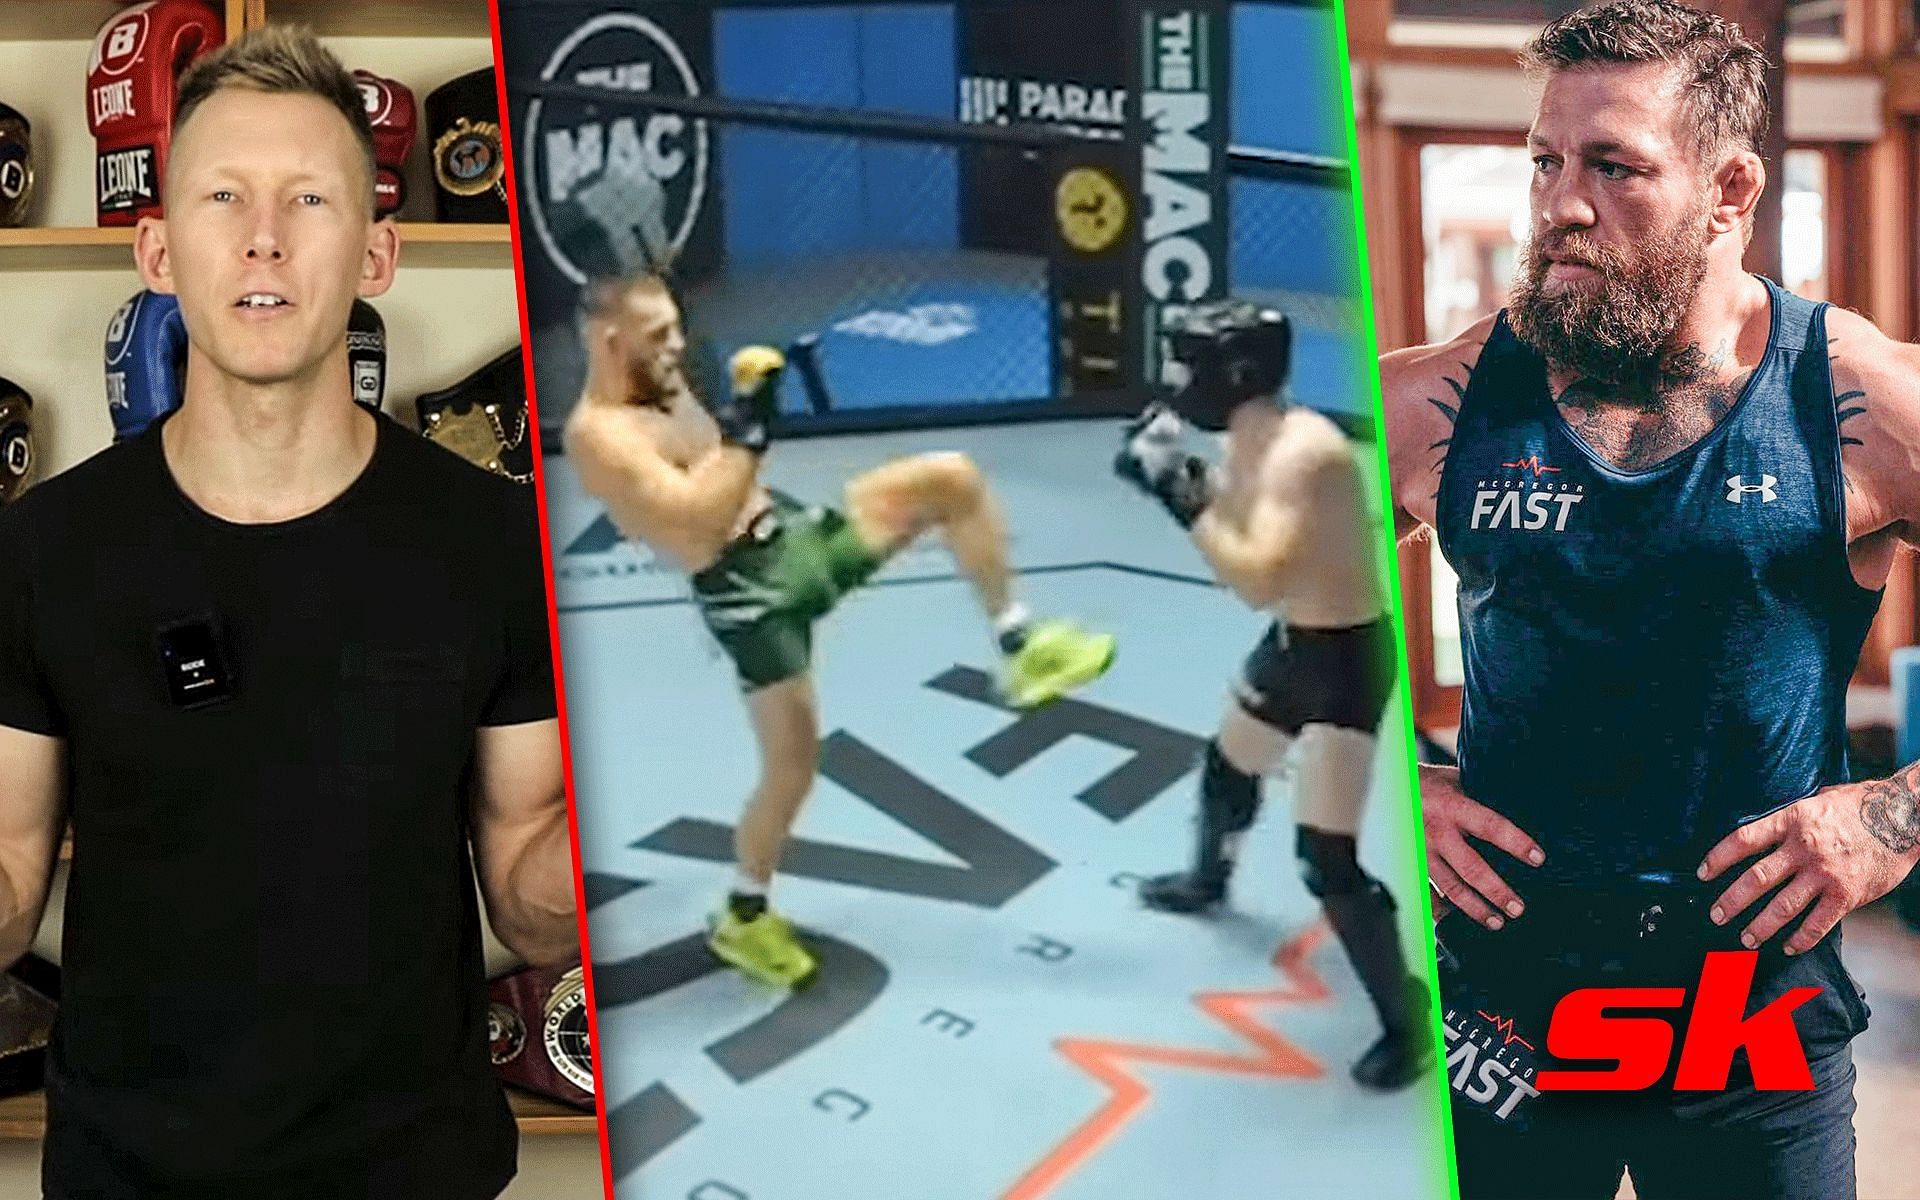 Former kickboxing champion offended by Conor McGregor sparring videos [Images via: Gabriel Varga and TheMacLife on YouTube, @thenotoriousmma on Instagram]